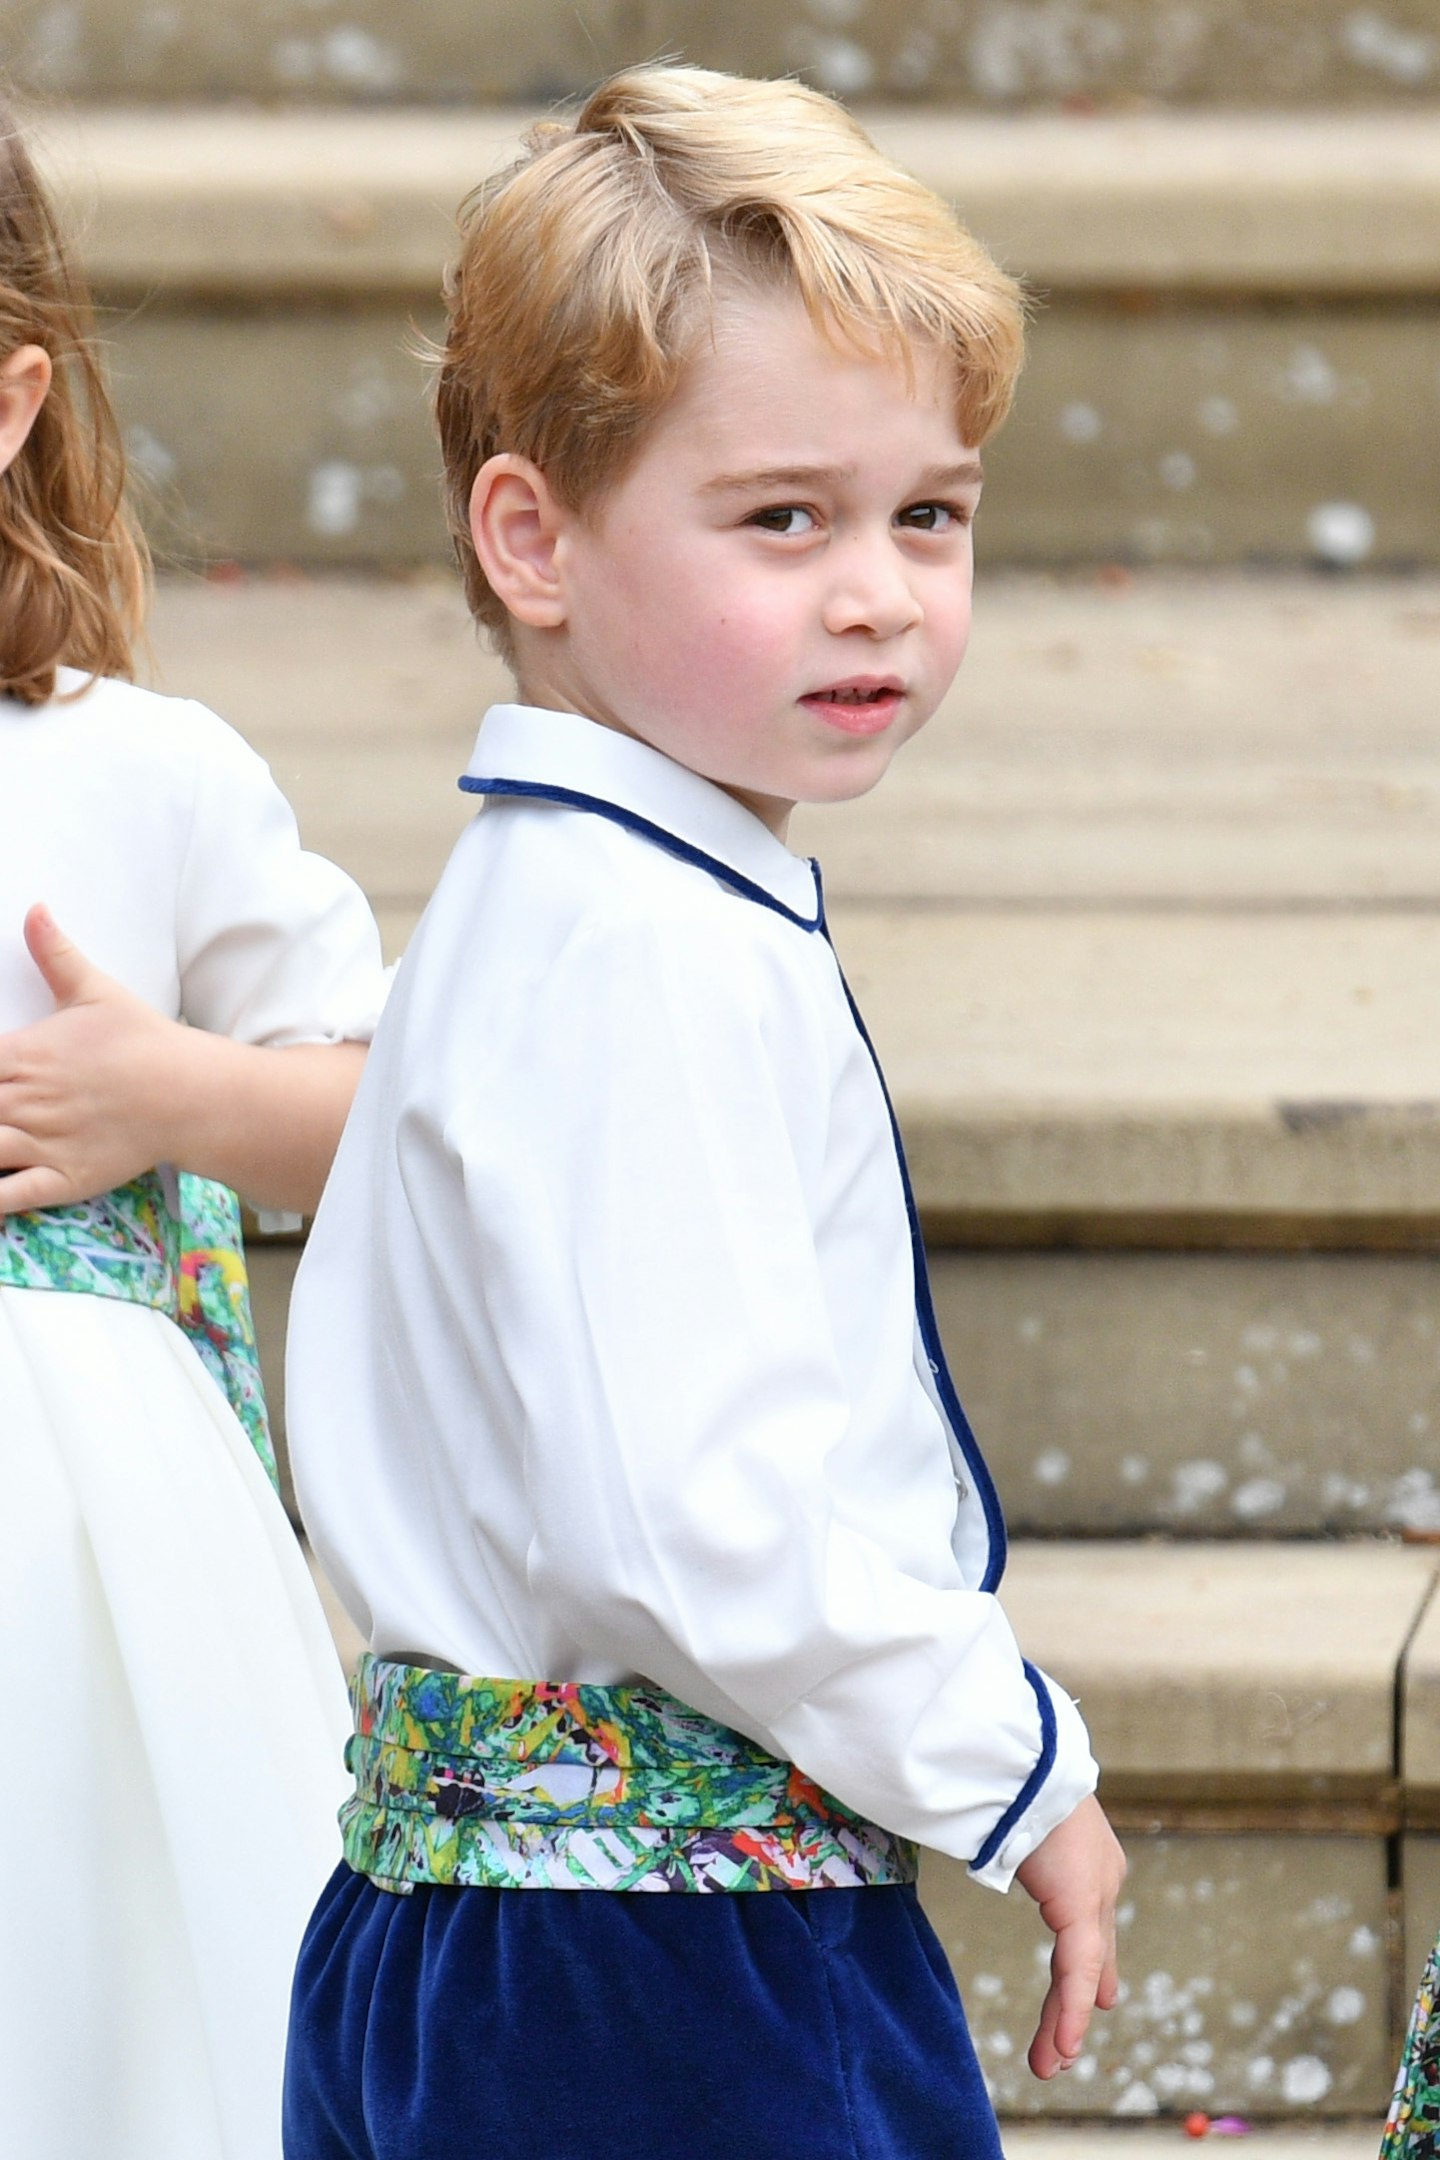 Prince George was preparing for Christmas in November as he was already singing carols